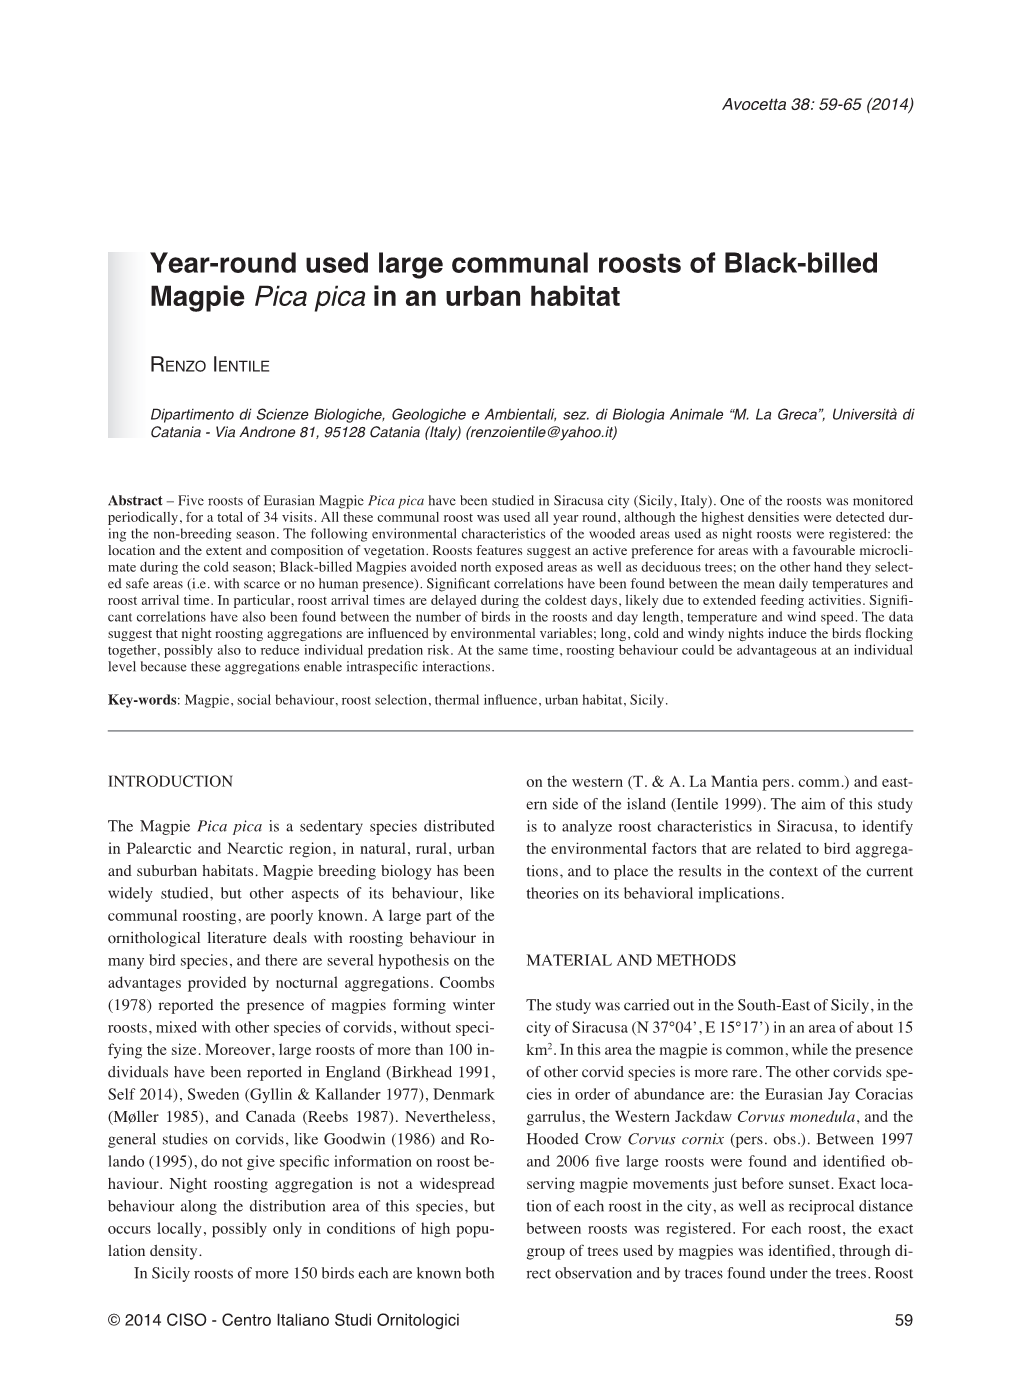 Year-Round Used Large Communal Roosts of Black-Billed Magpie Pica Pica in an Urban Habitat